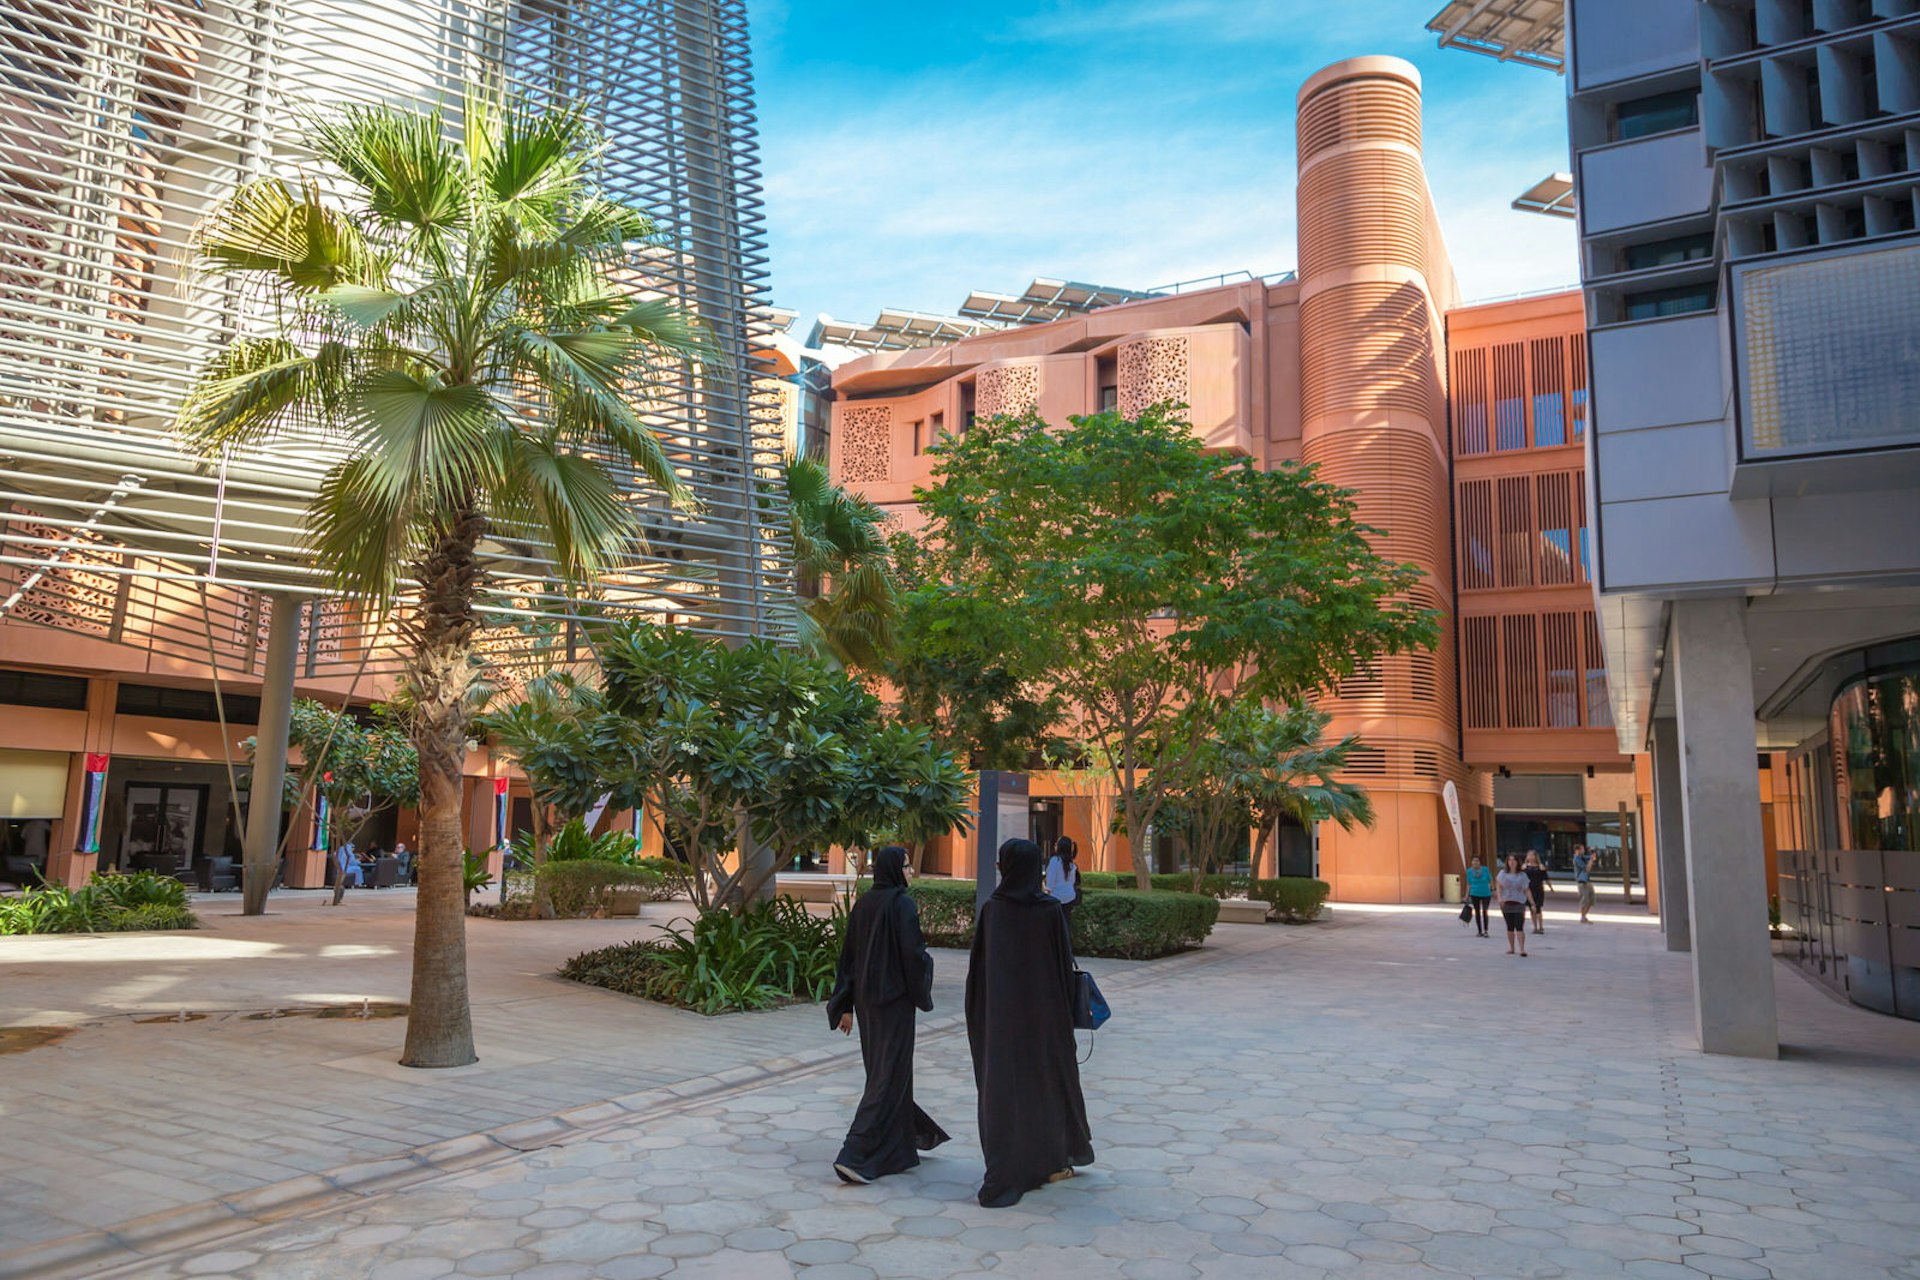 Two women walk through Masdar City, a project that aims to build the first sustainable city in the world